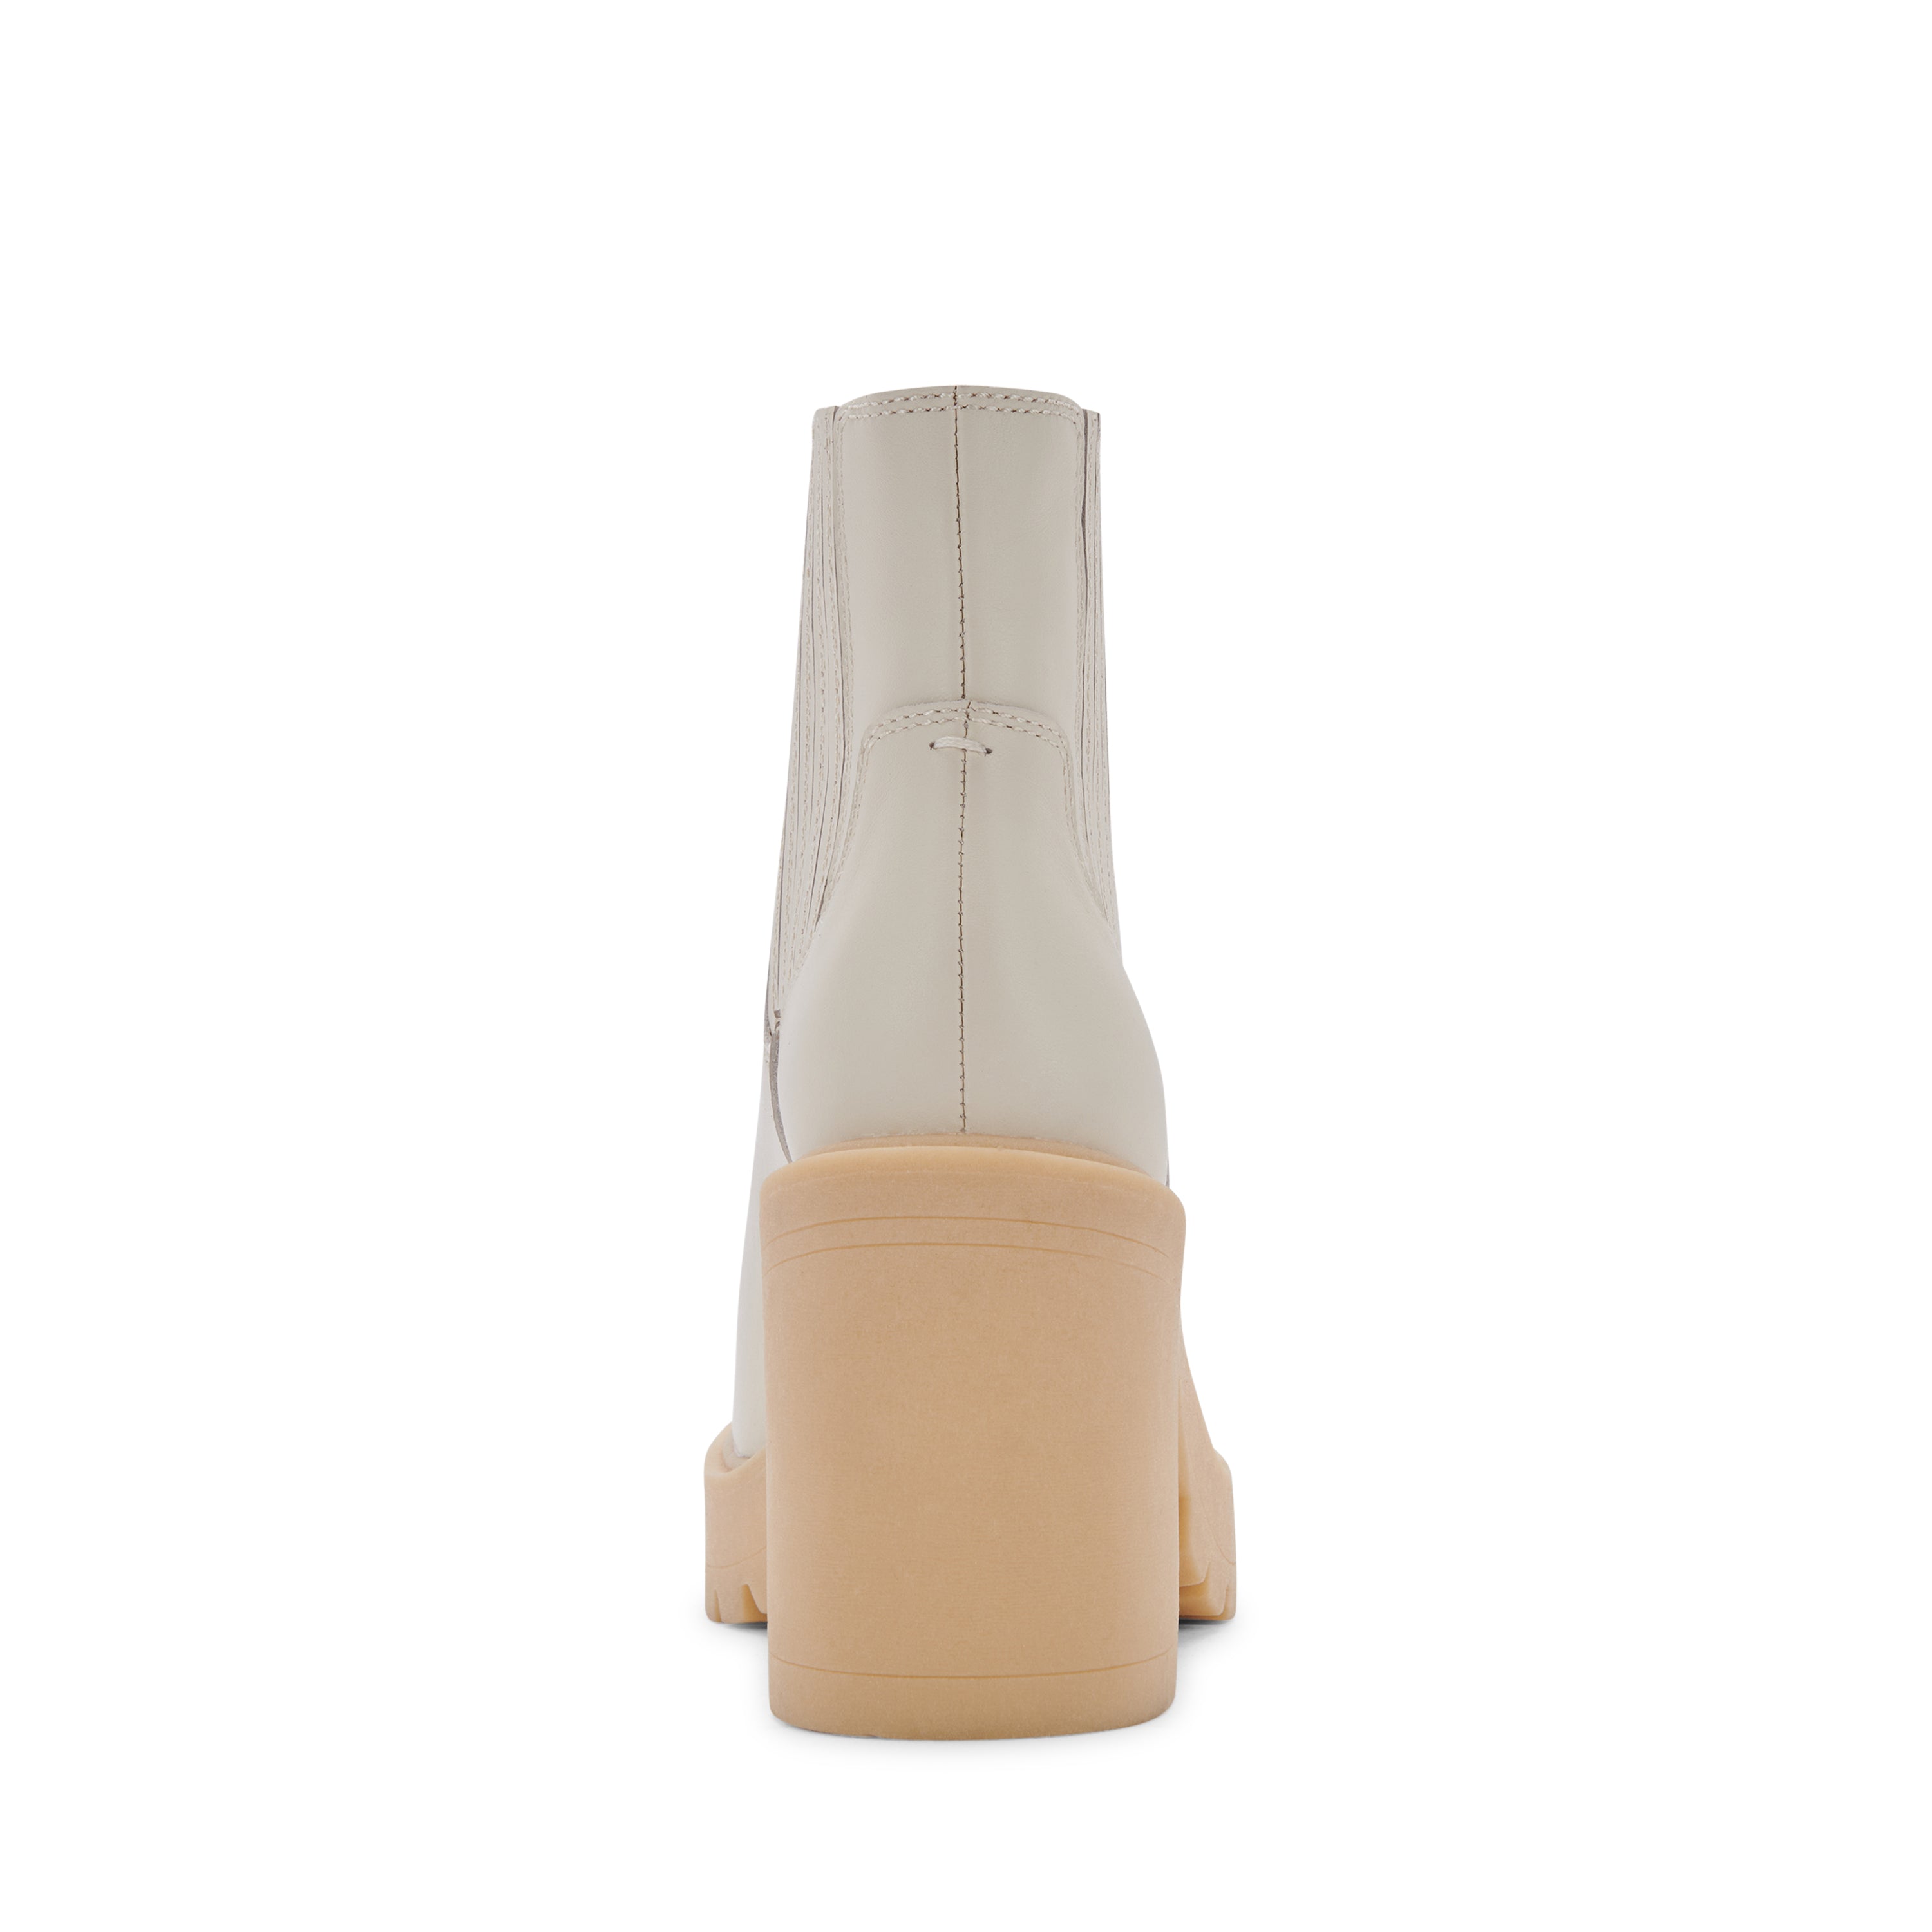 Caster H2o Ivory Leather Botines de Tacon Marfil para Mujer